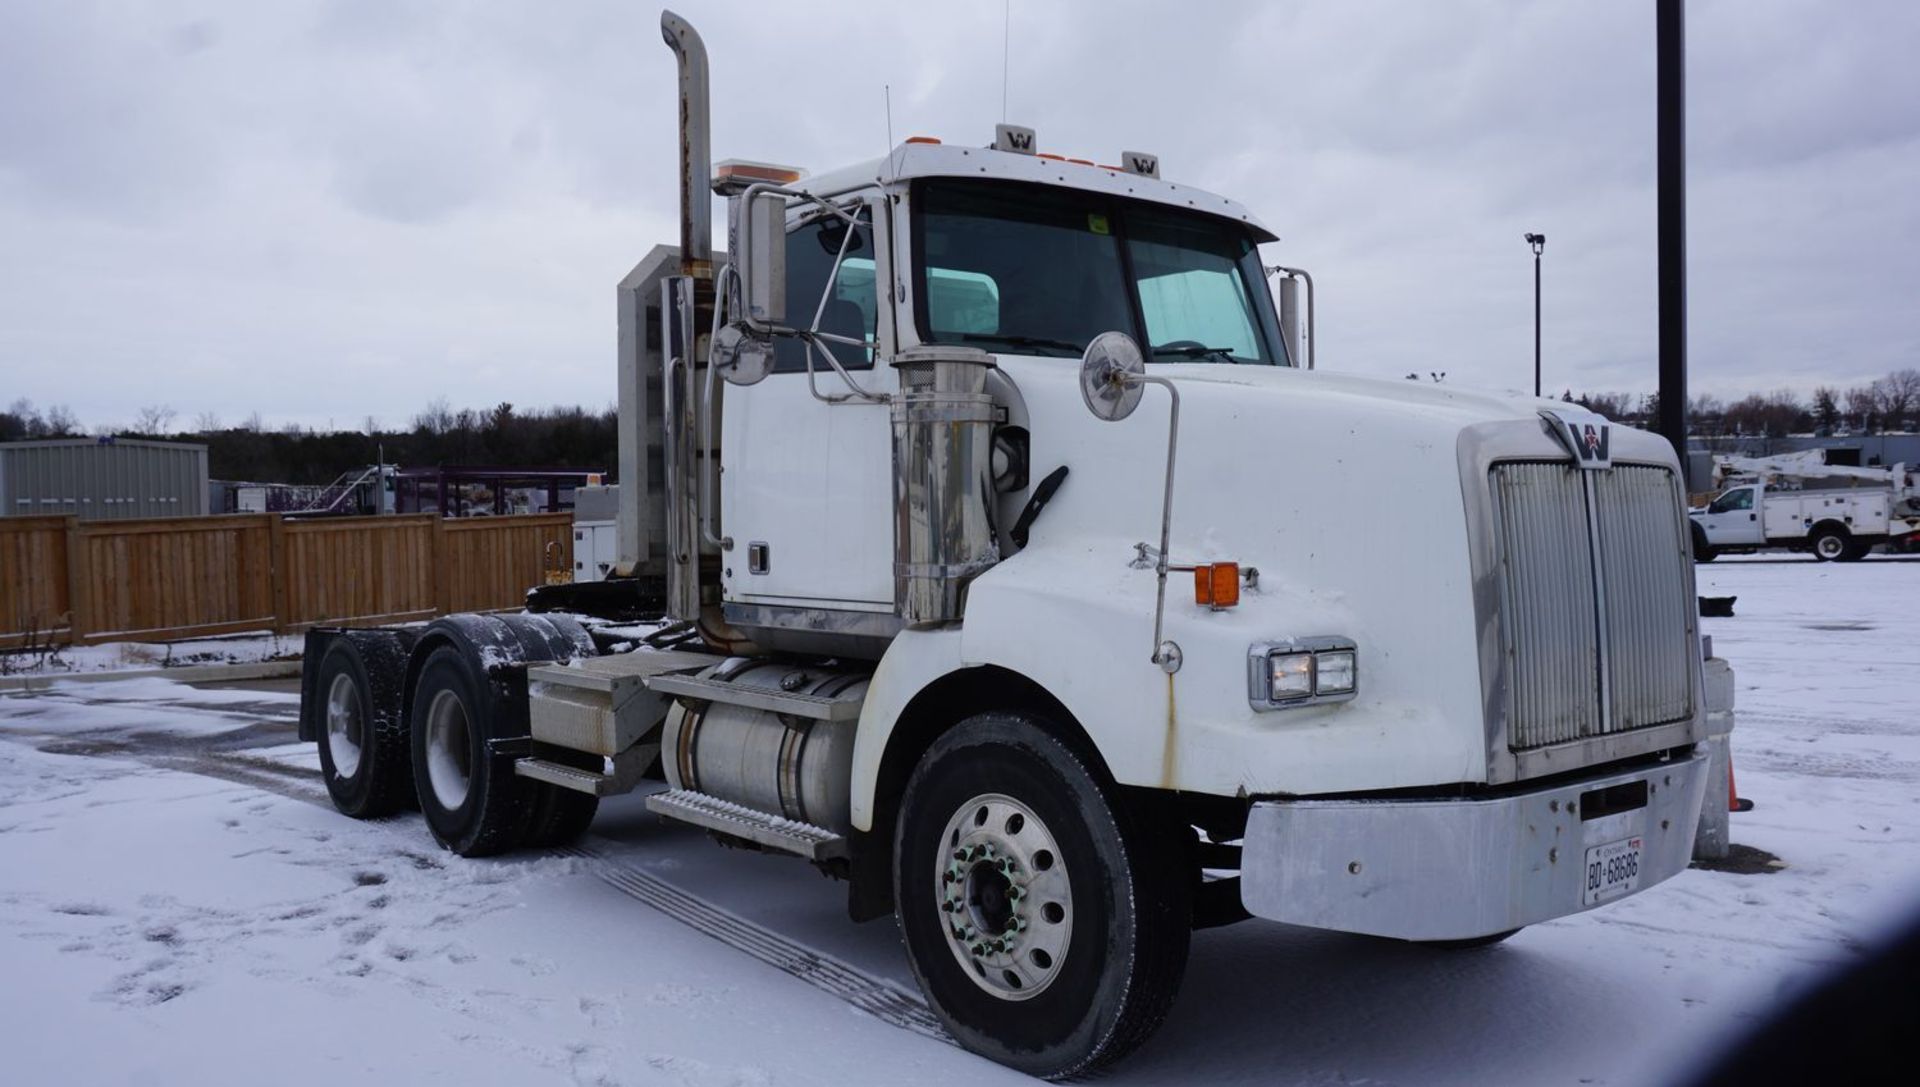 2002 WESTERN STAR 4900 CONVENTIONAL CAB TRUCK W/ DETROIT 12.7 L ENGINE, EATON FULLER 18-SPEED TRANS - Image 4 of 17